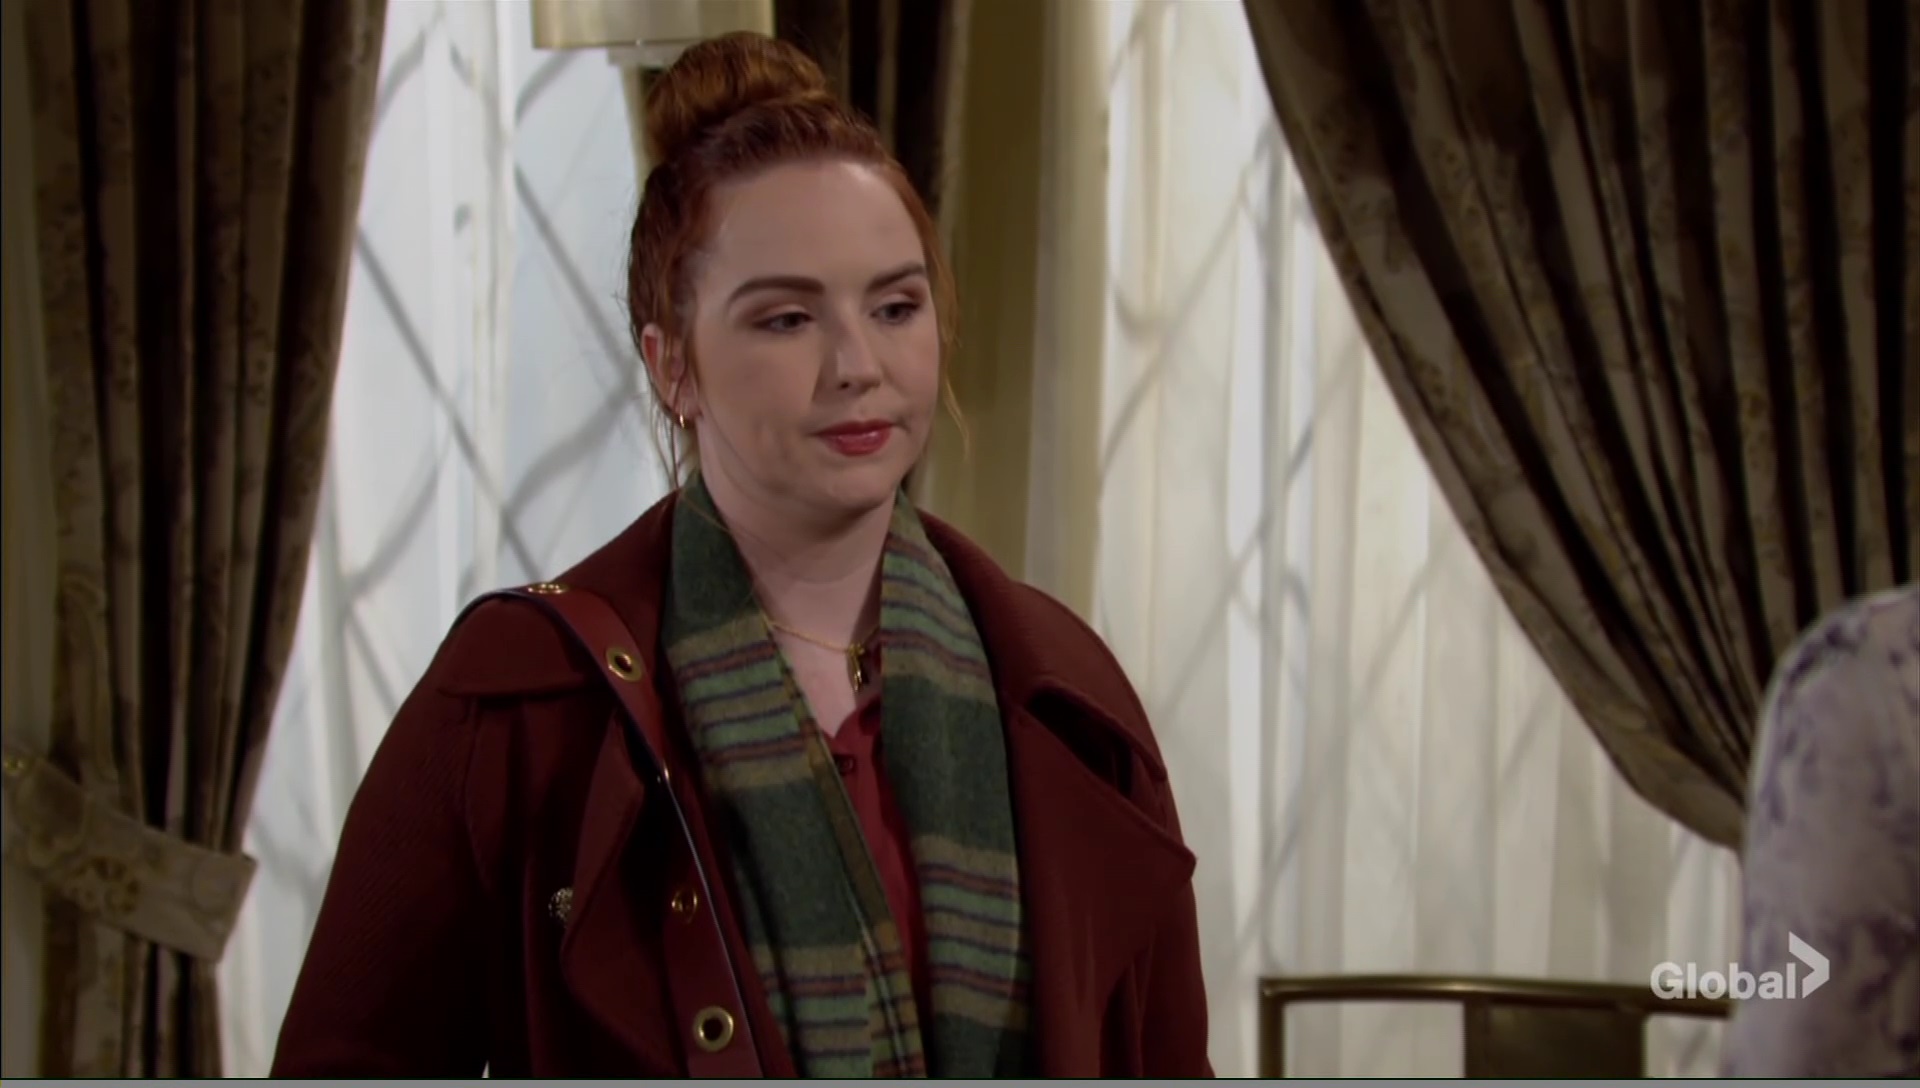 mariah miffed baby gone young and restless cbs Y&R day ahead recap